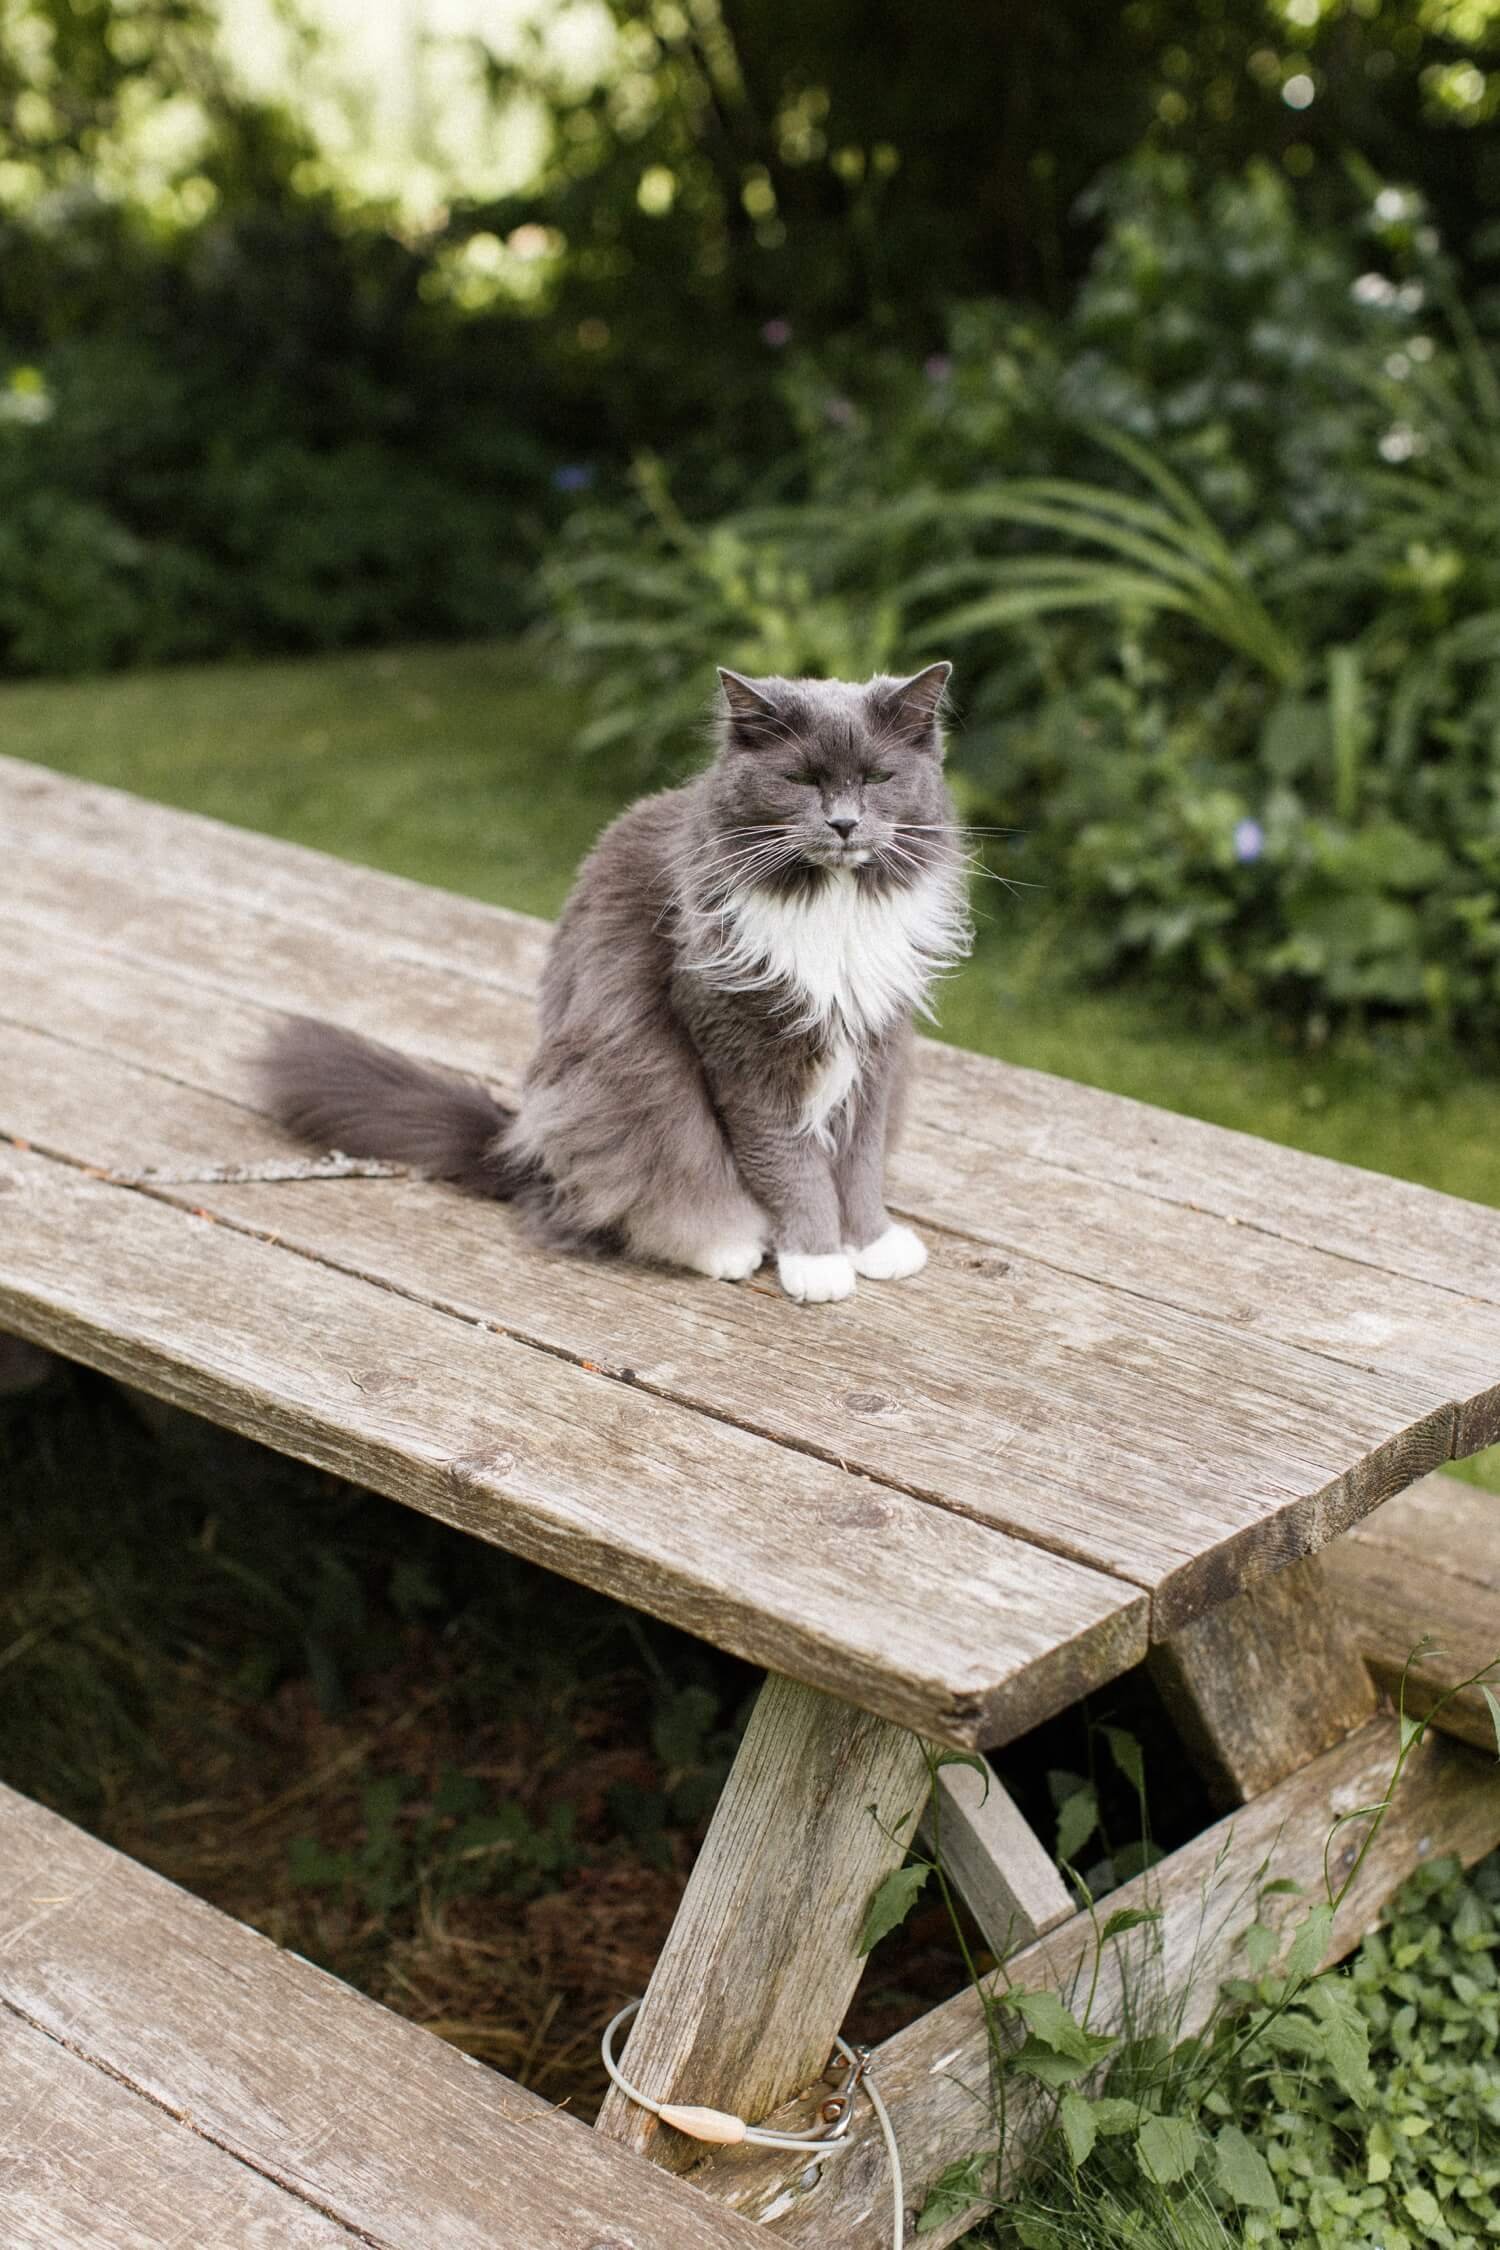 022_Mount Hood Organic Farms Wedding-2_Gray and white long-haired cat sits on wooden picnic table.jpg